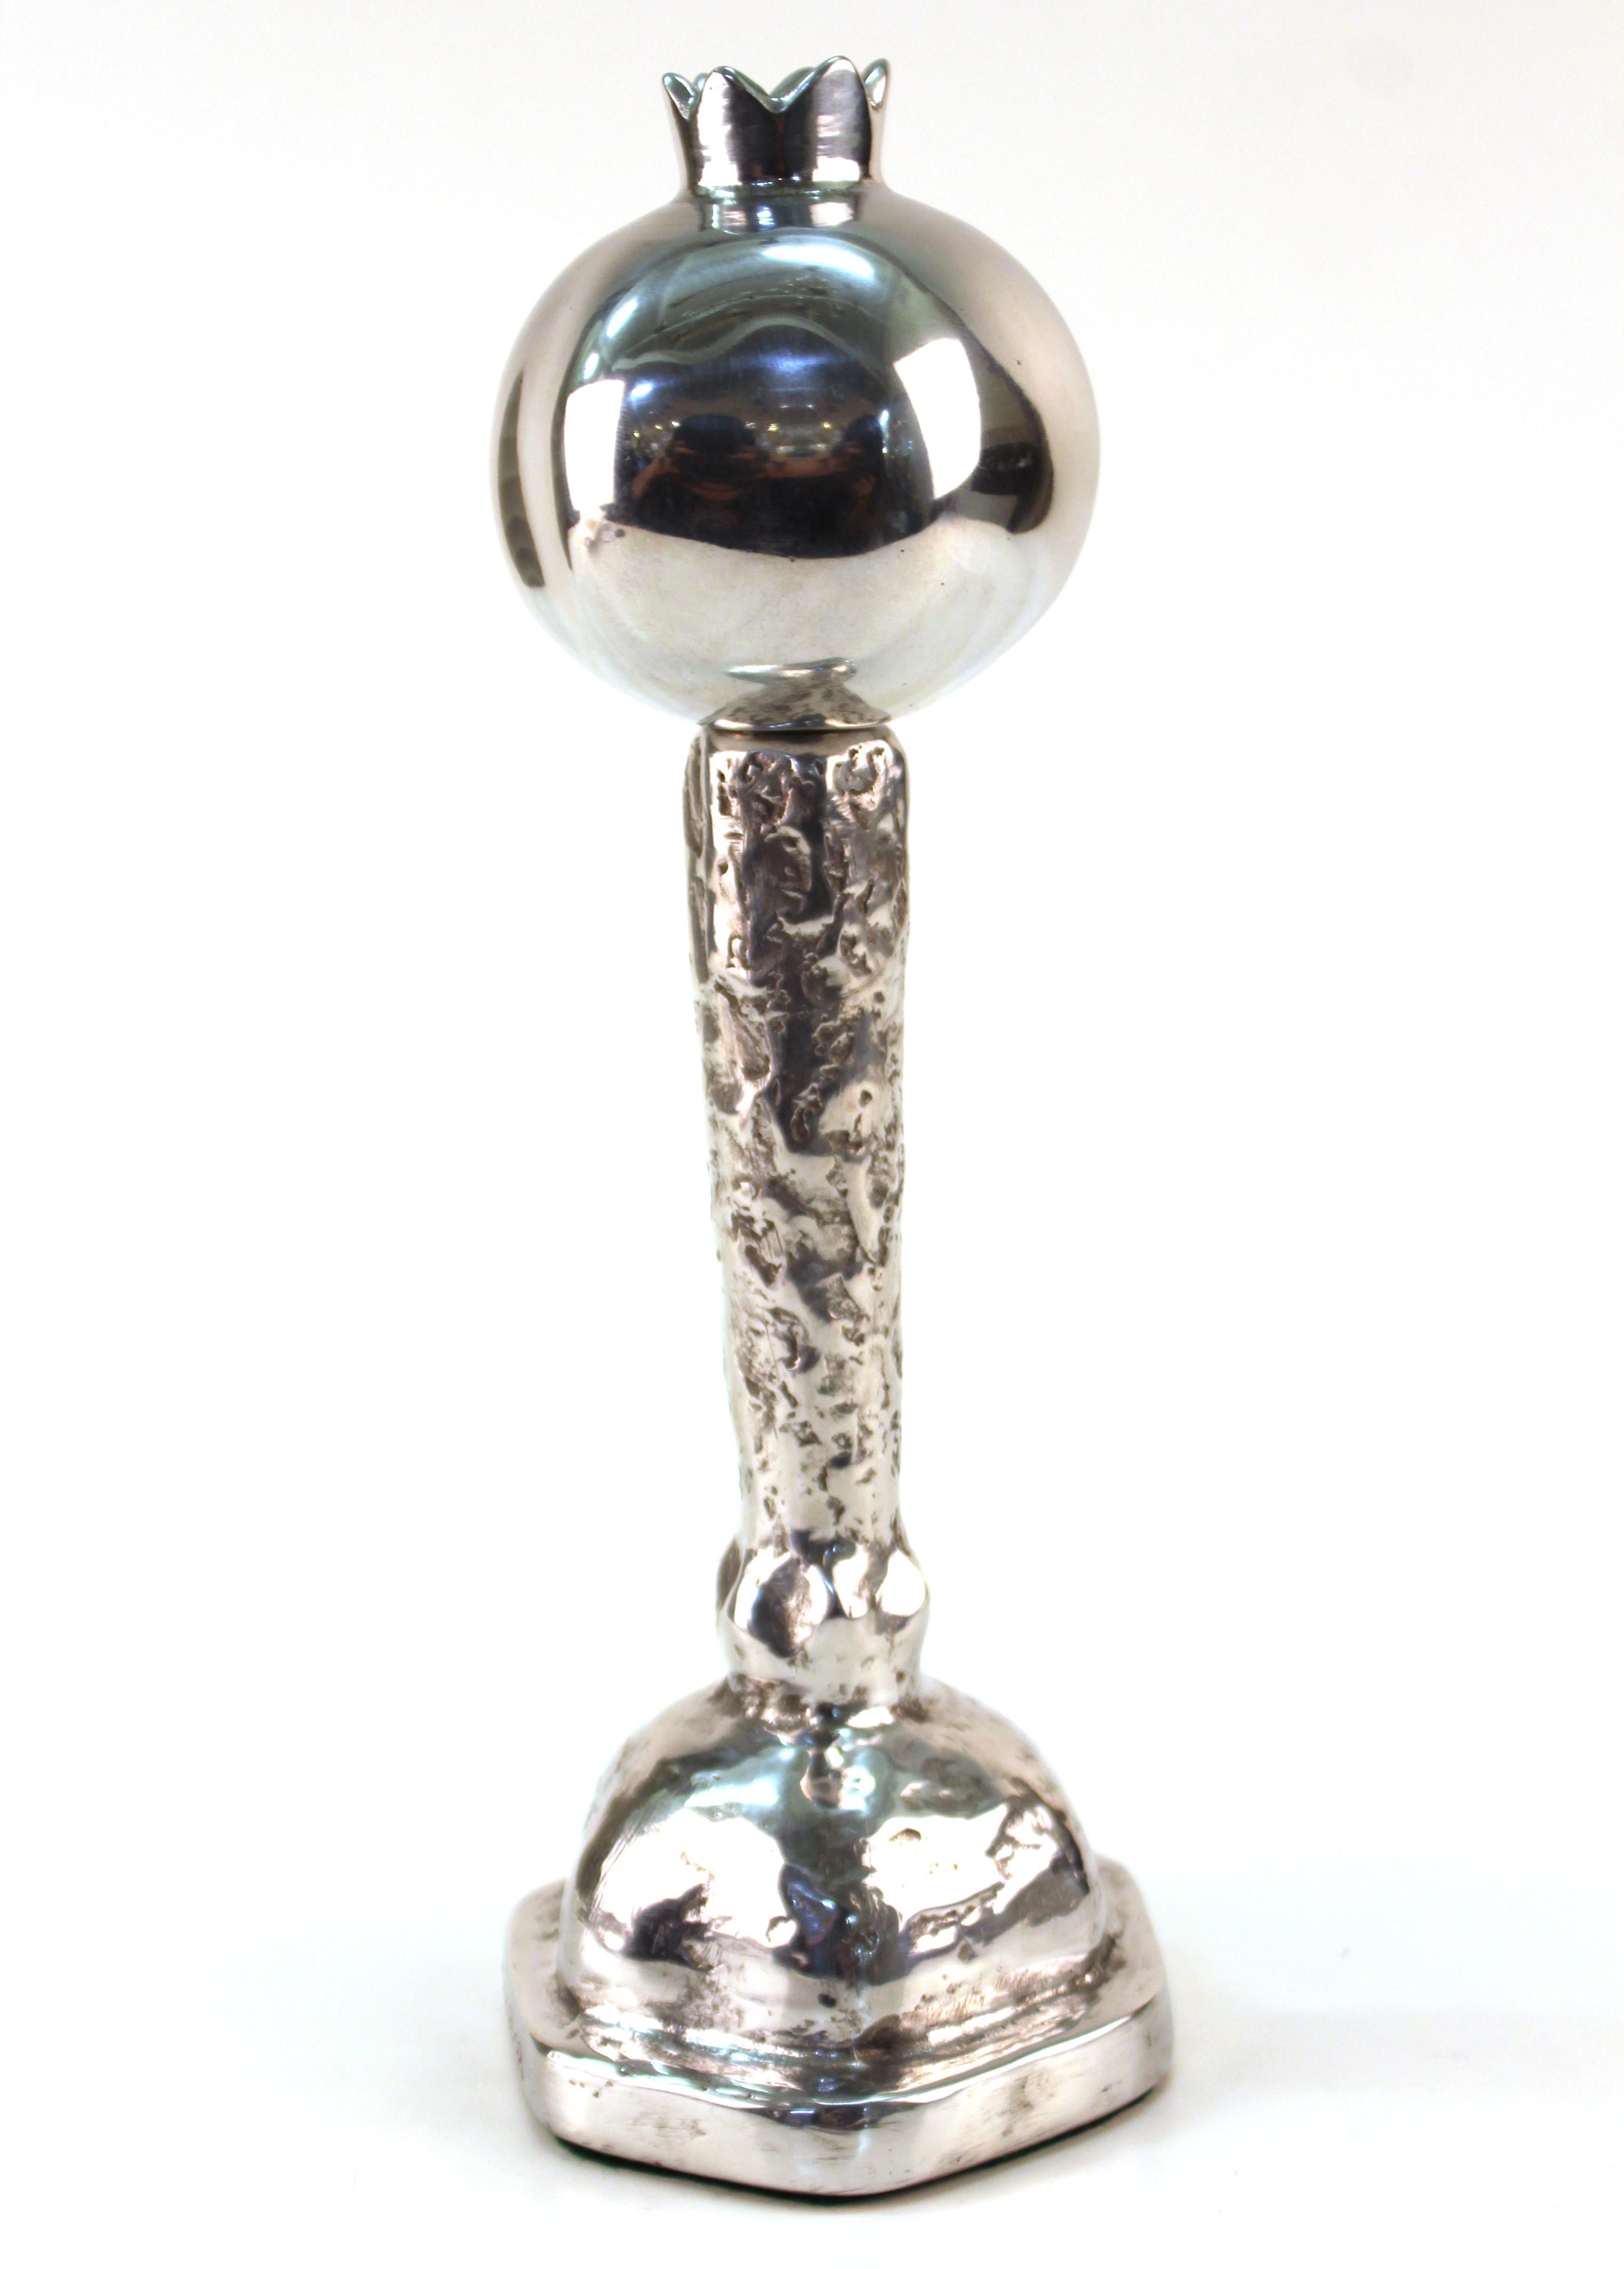 Modern Oded Halahmy 'One or Two' Candlestick in Cast Aluminum